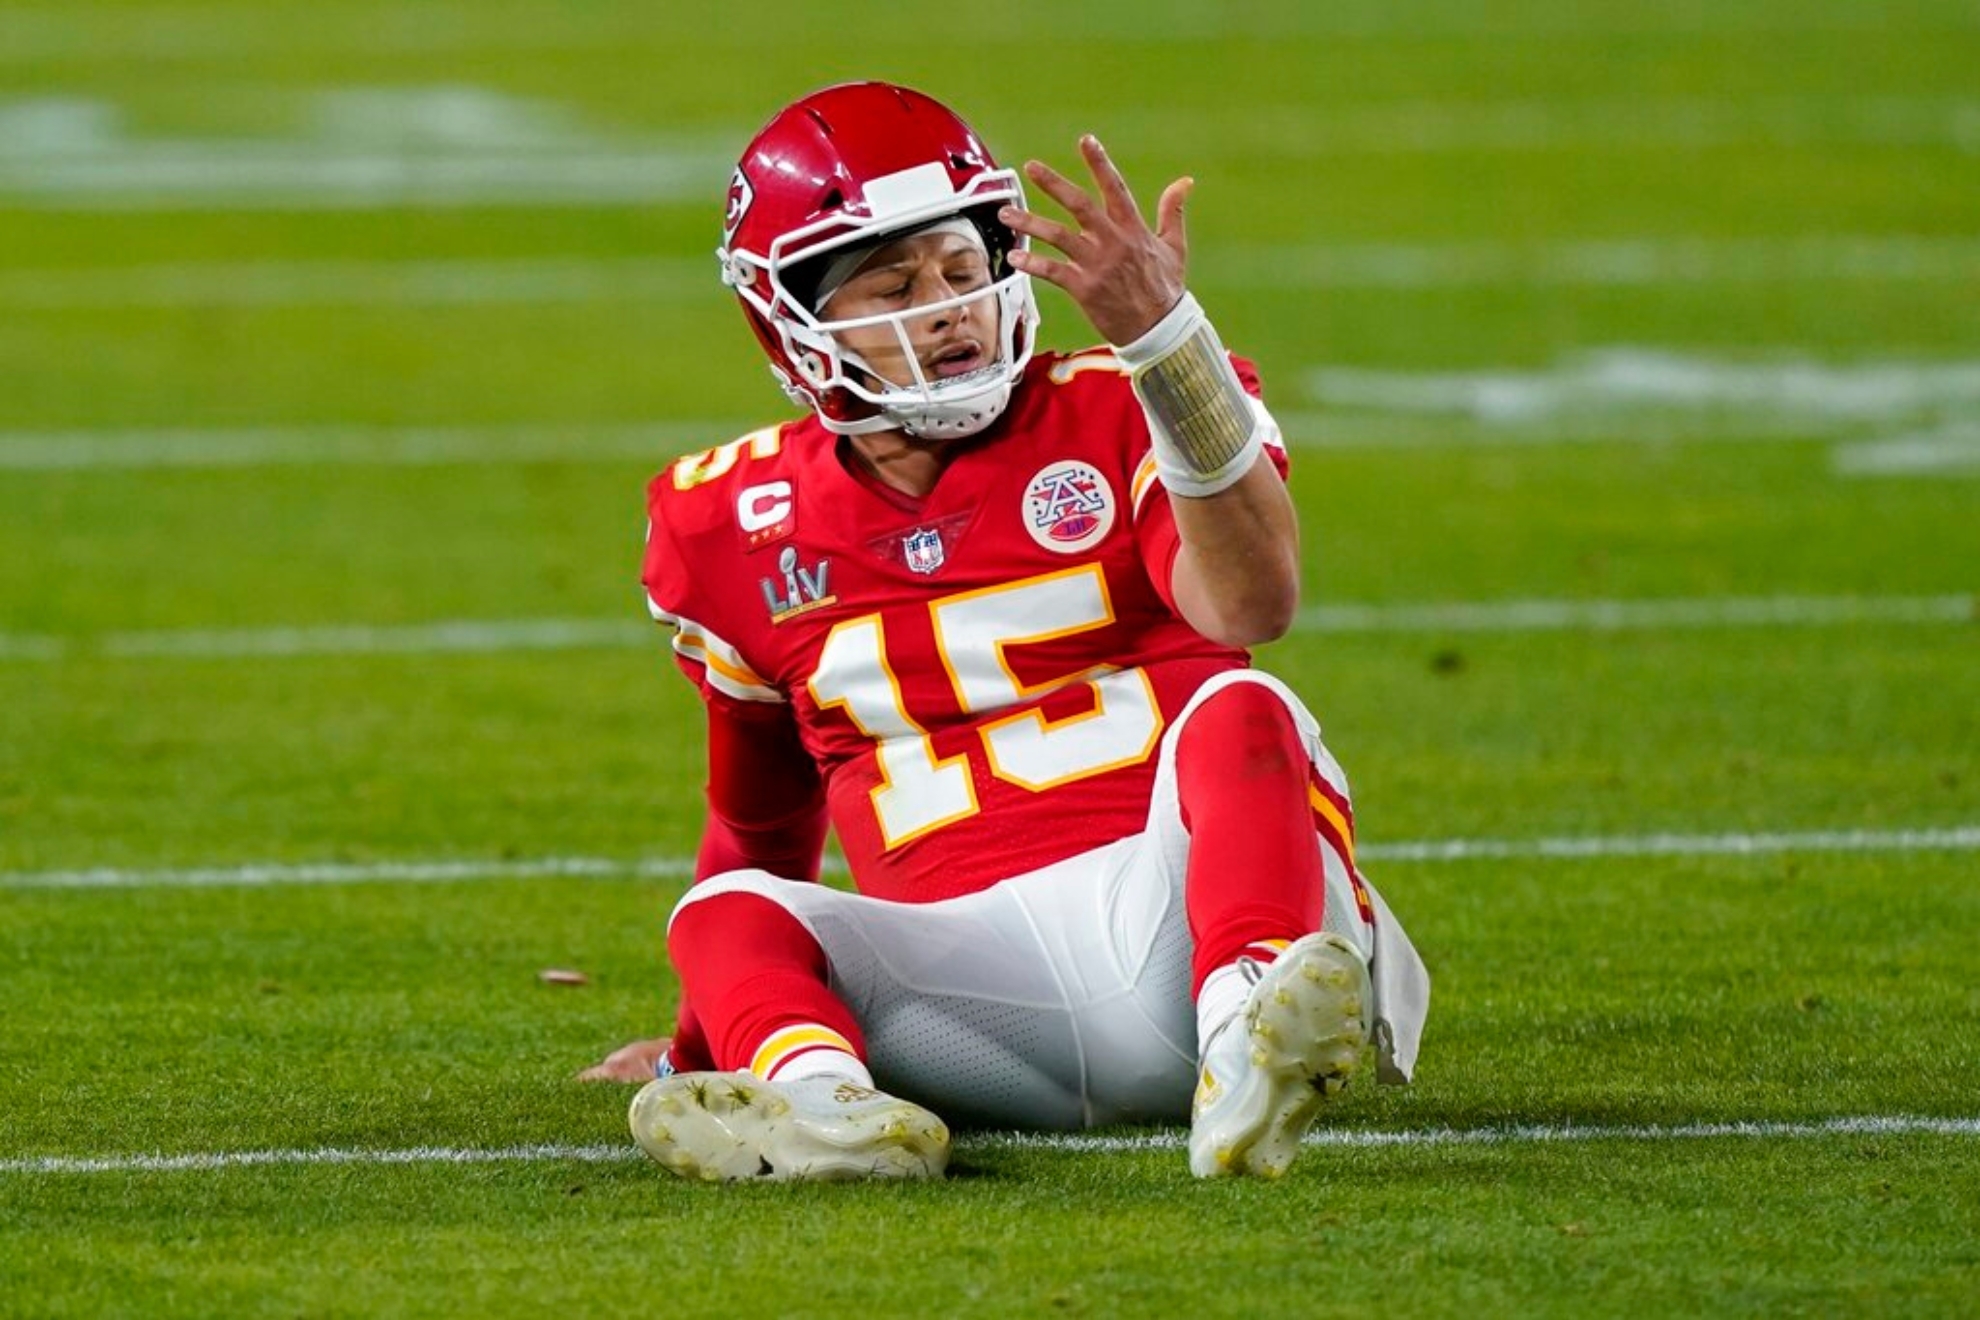 Mahomes revealed the pain he experiences from that loss